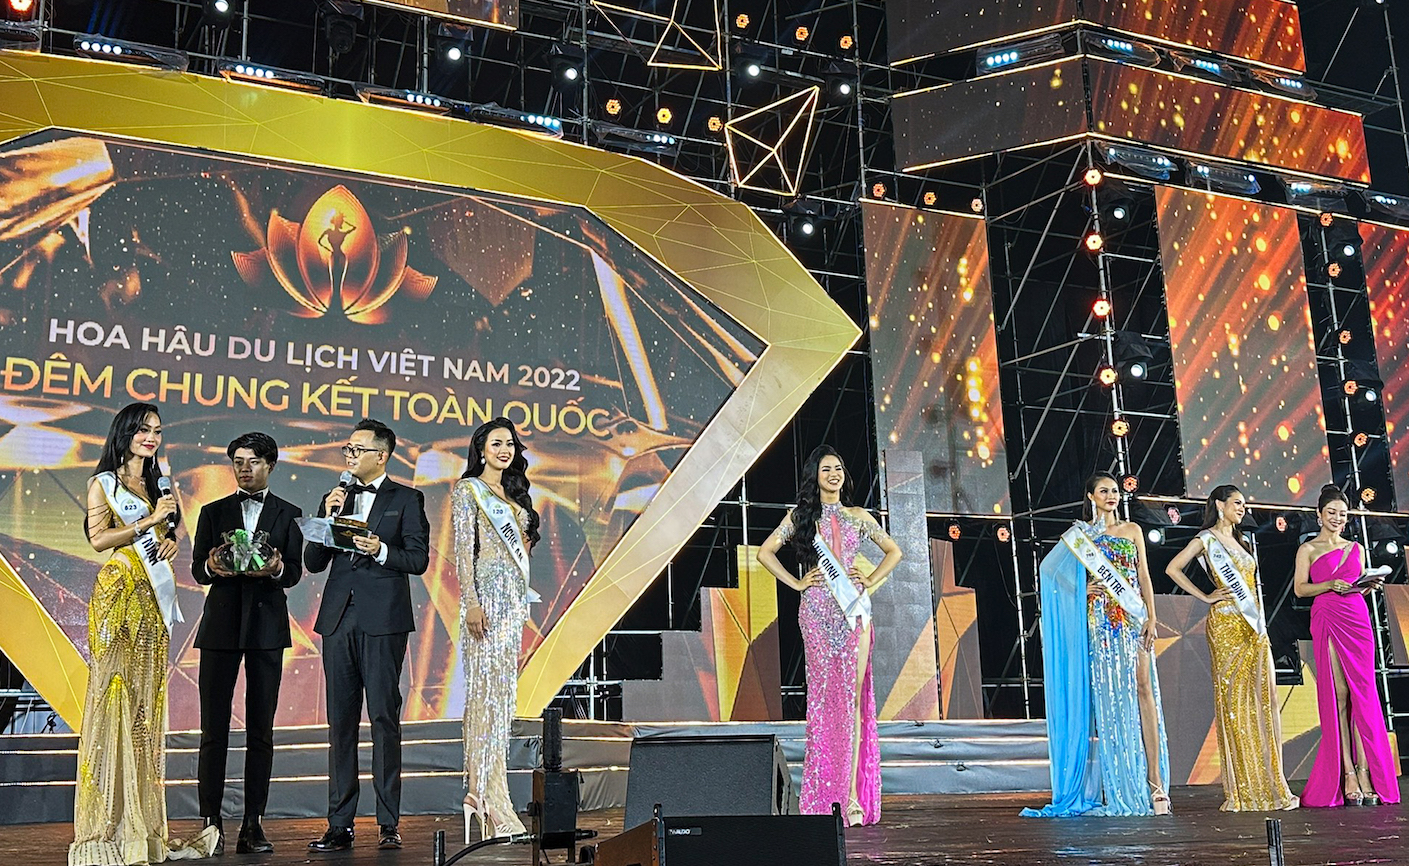 This supplied photo shows the top 5 contestants in the Miss Tourism Vietnam 2022 finalé in Phu Quoc City, Kien Giang Province, November 13, 2022.